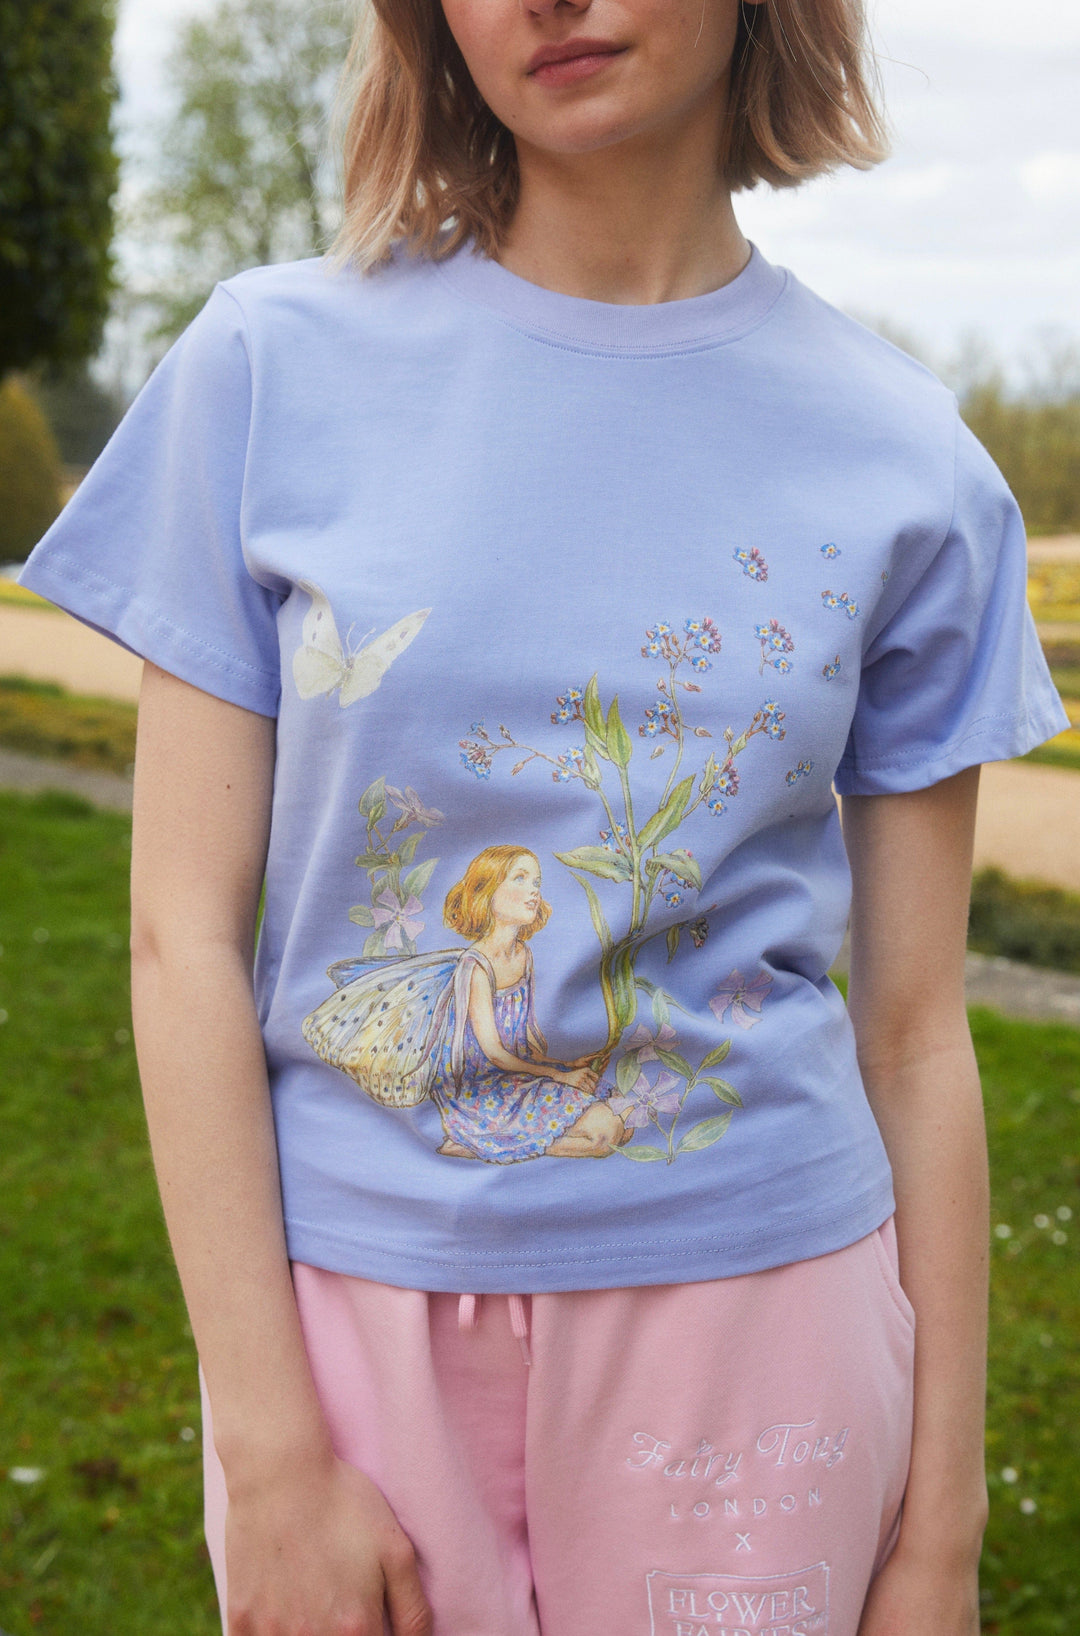 Fairy Tong T-shirt Forget-me-not Fairy T-shirt